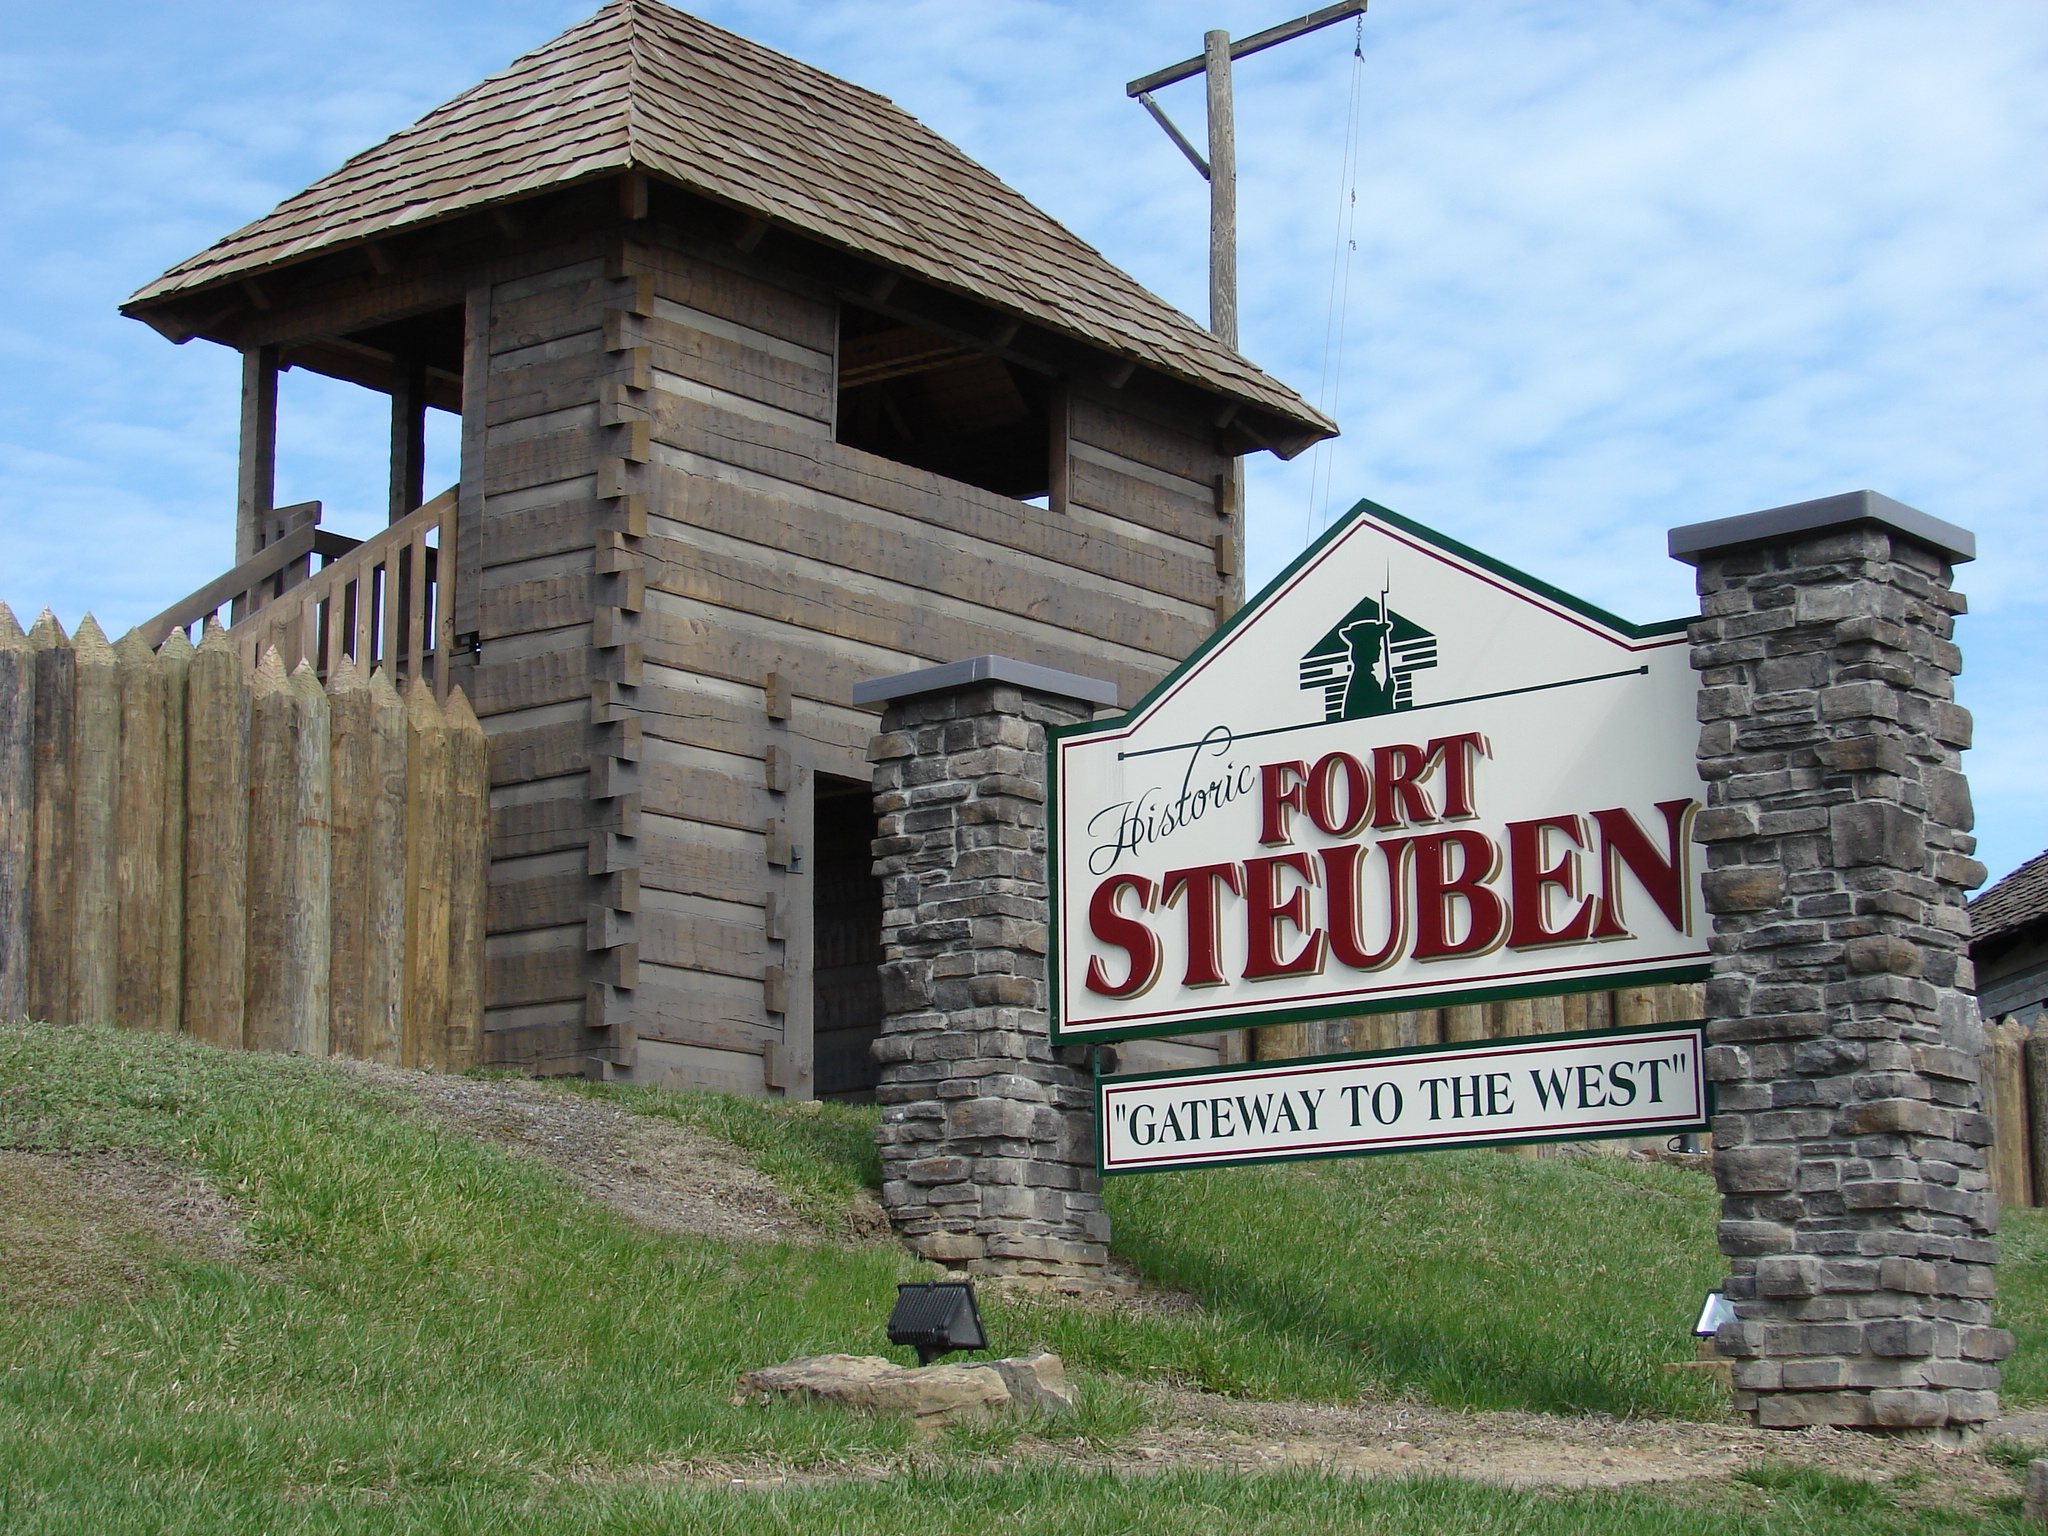 Historic Fort Steuben and the Steubenville Visitor Center